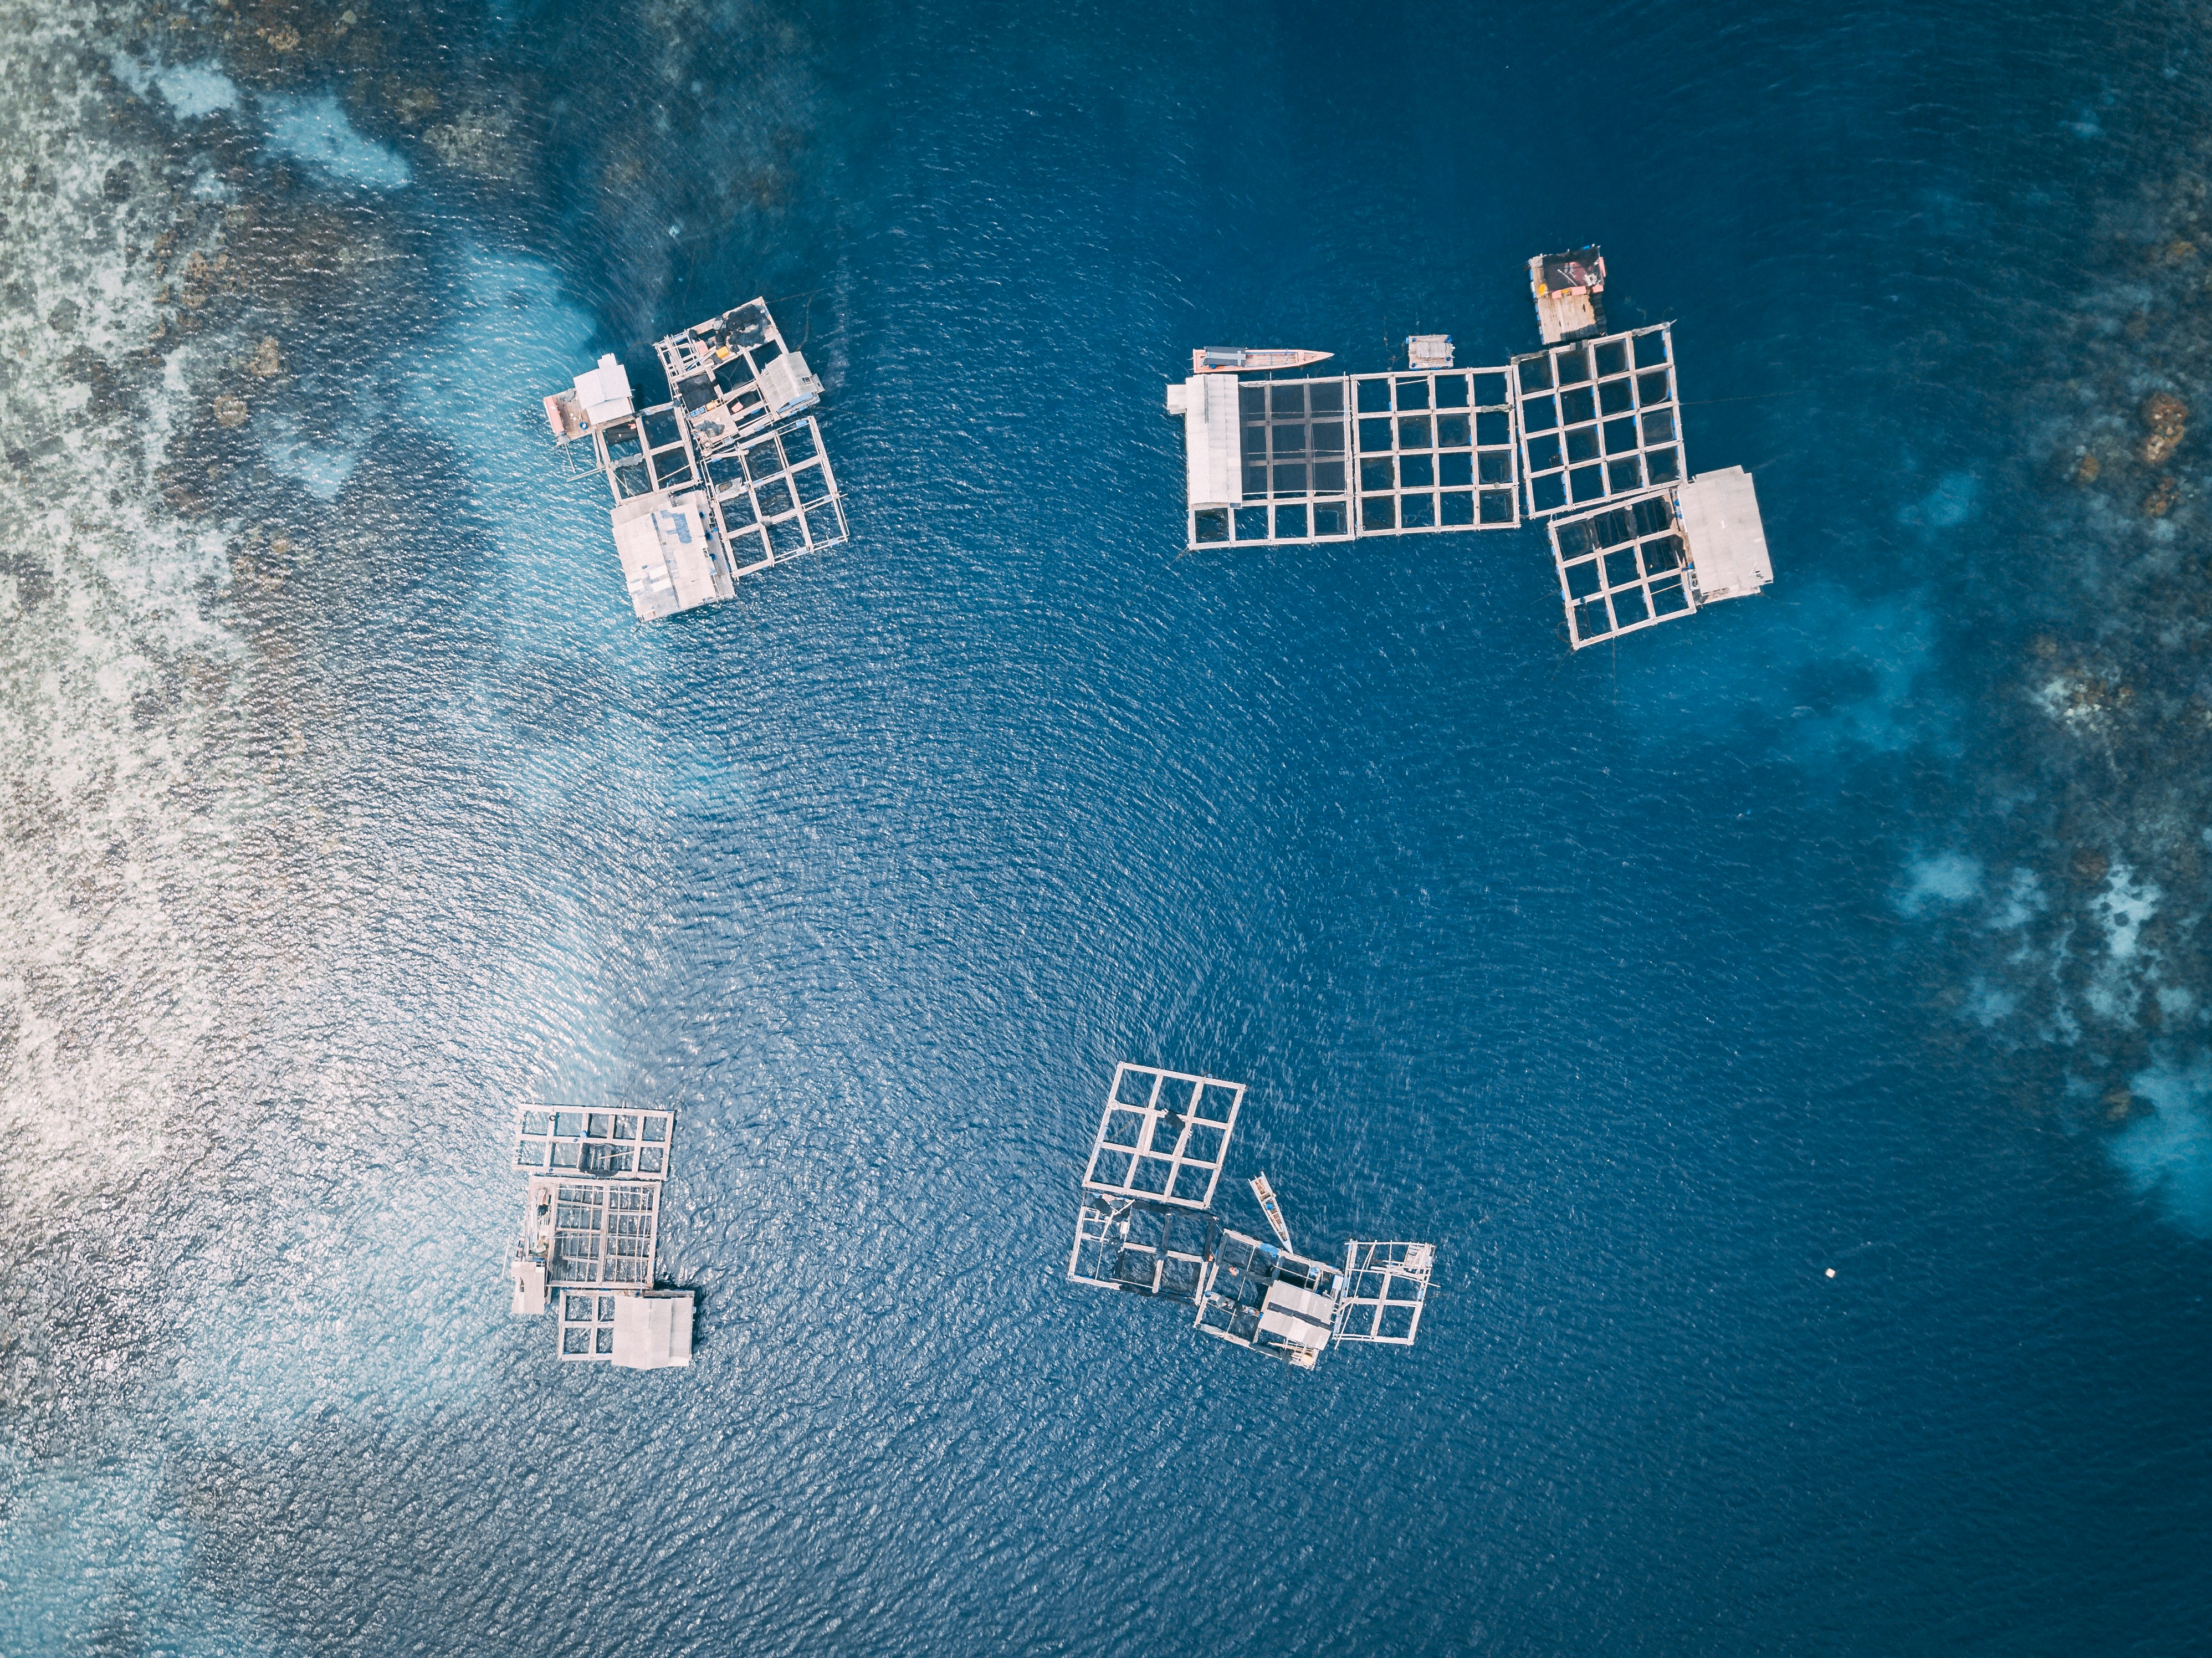 Aerial view of fish cages in a body of water. Photo by Hanson Lu via Unsplash.